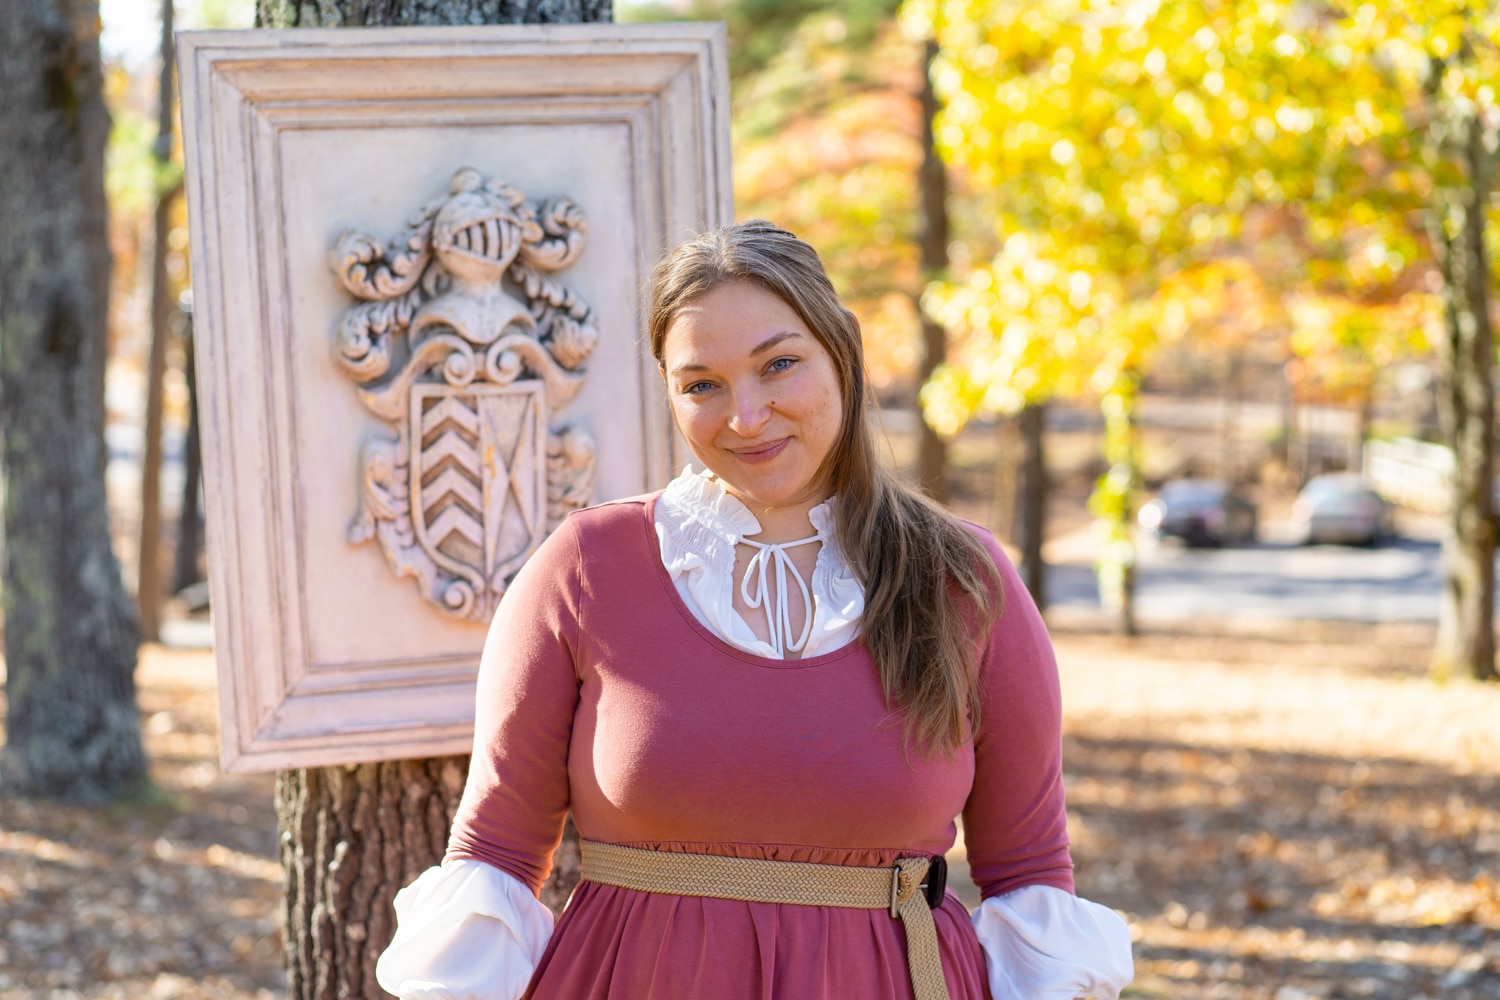 Woman in a pink dress poses for the camera in front of a picture of a knight on a tree at the Arkansas Renaissance Festival.